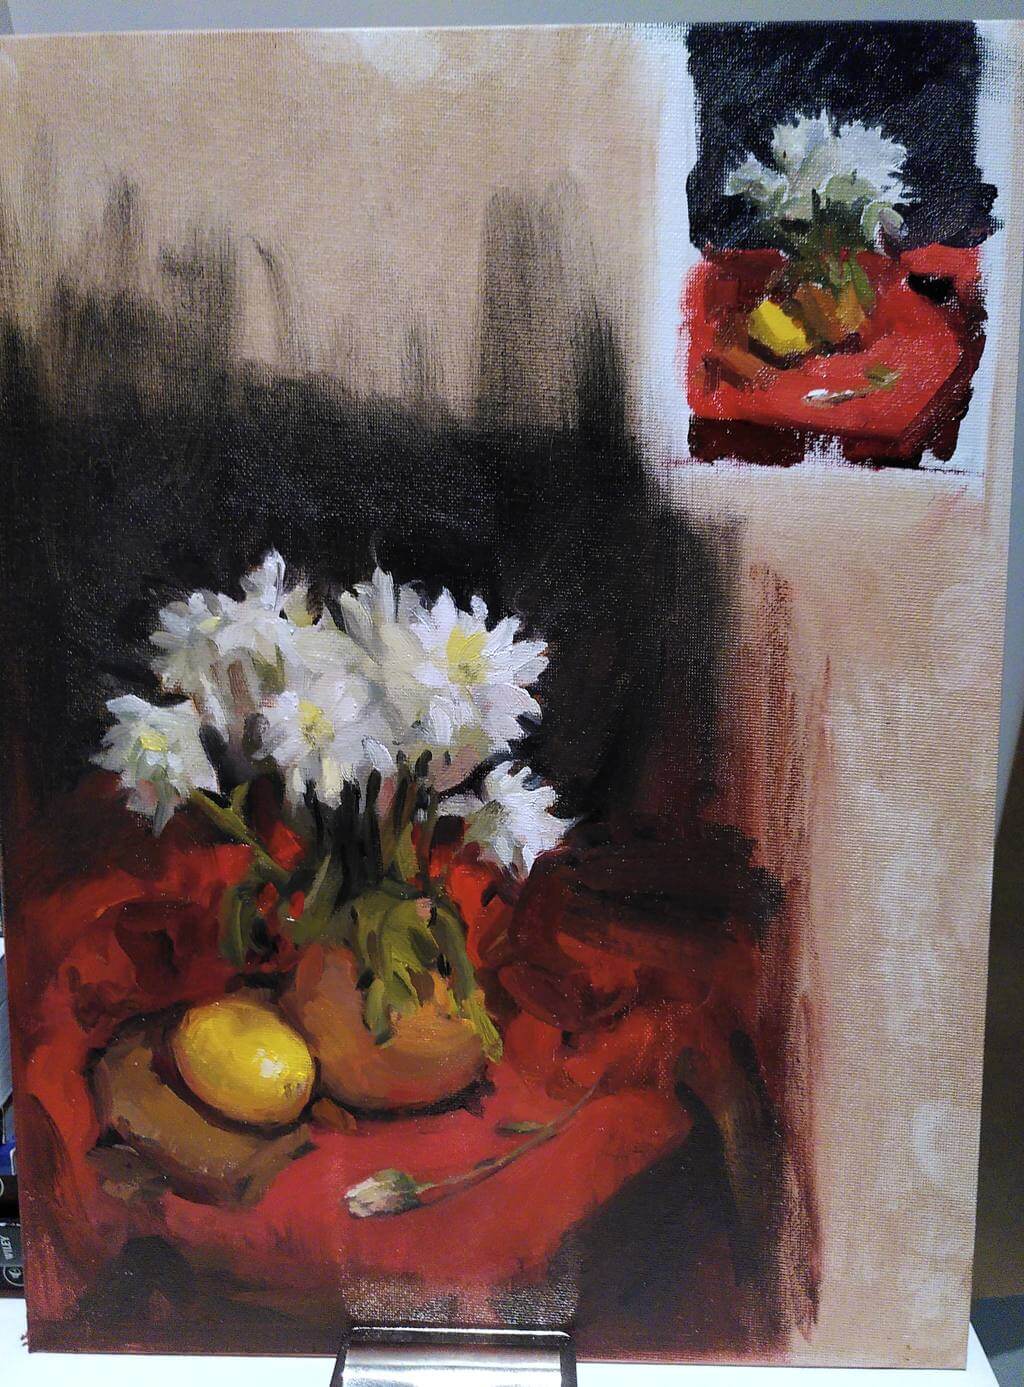 Loose oil painting of white flowers in a clay vase beside a lemon, against a vivid red cloth background.